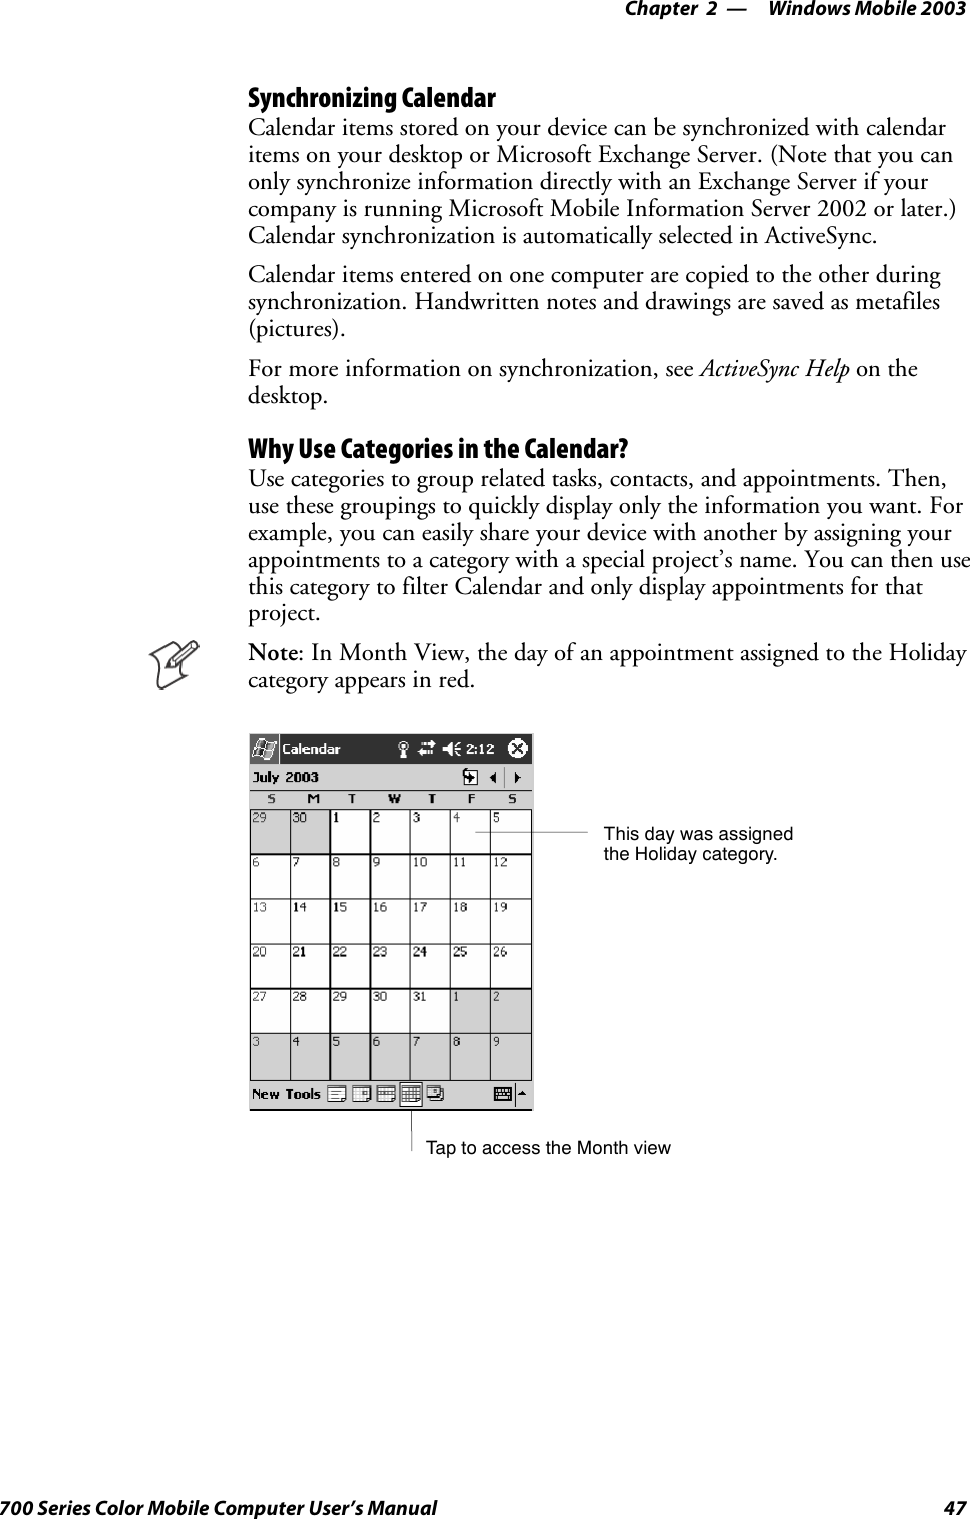 Windows Mobile 2003—Chapter 247700 Series Color Mobile Computer User’s ManualSynchronizing CalendarCalendar items stored on your device can be synchronized with calendaritems on your desktop or Microsoft Exchange Server. (Note that you canonly synchronize information directly with an Exchange Server if yourcompany is running Microsoft Mobile Information Server 2002 or later.)Calendar synchronization is automatically selected in ActiveSync.Calendar items entered on one computer are copied to the other duringsynchronization. Handwritten notes and drawings are saved as metafiles(pictures).For more information on synchronization, see ActiveSync Help on thedesktop.Why Use Categories in the Calendar?Use categories to group related tasks, contacts, and appointments. Then,use these groupings to quickly display only the information you want. Forexample, you can easily share your device with another by assigning yourappointments to a category with a special project’s name. You can then usethis category to filter Calendar and only display appointments for thatproject.Note: In Month View, the day of an appointment assigned to the Holidaycategory appears in red.TaptoaccesstheMonthviewThis day was assignedthe Holiday category.